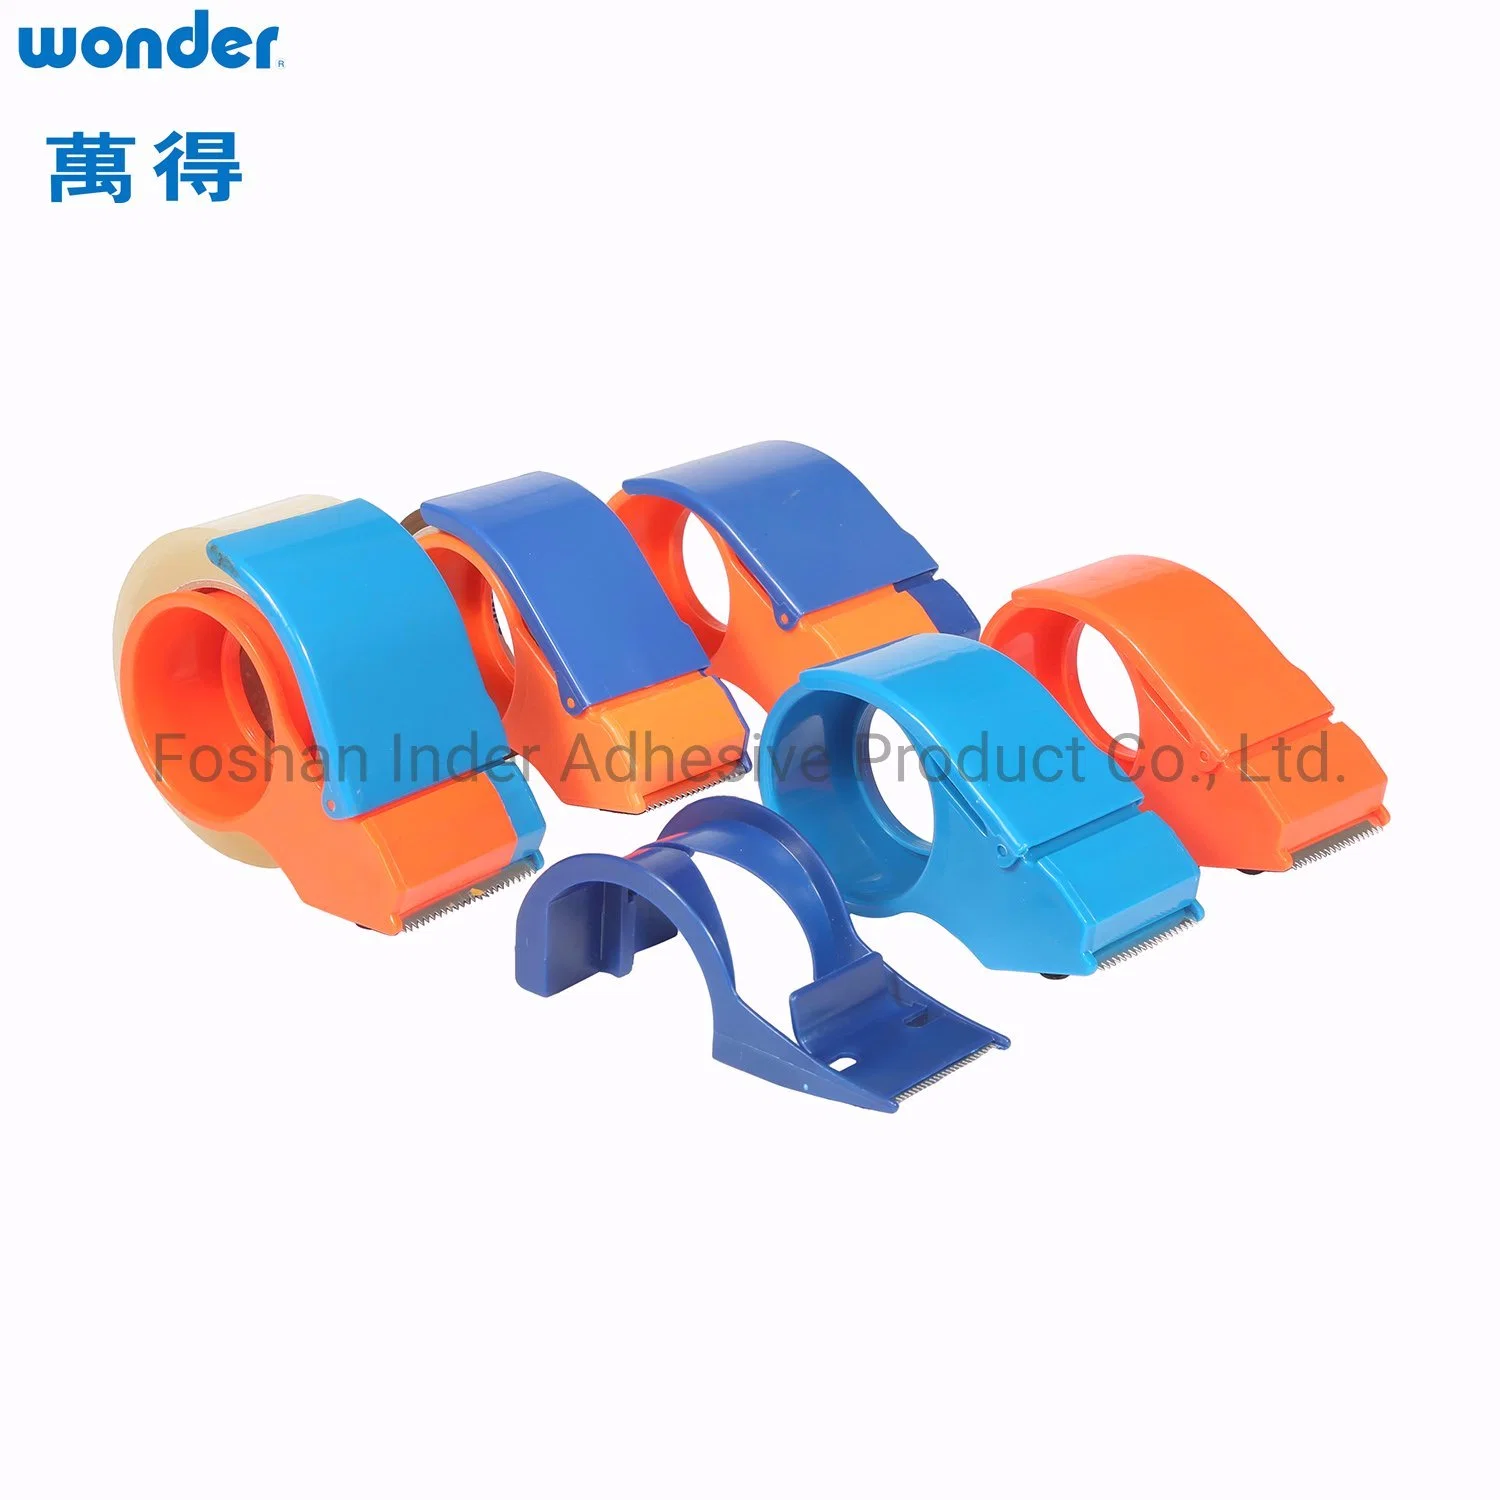 Width 15mm OPP Stationery Tape with Wonder Brand and High quality/High cost performance 